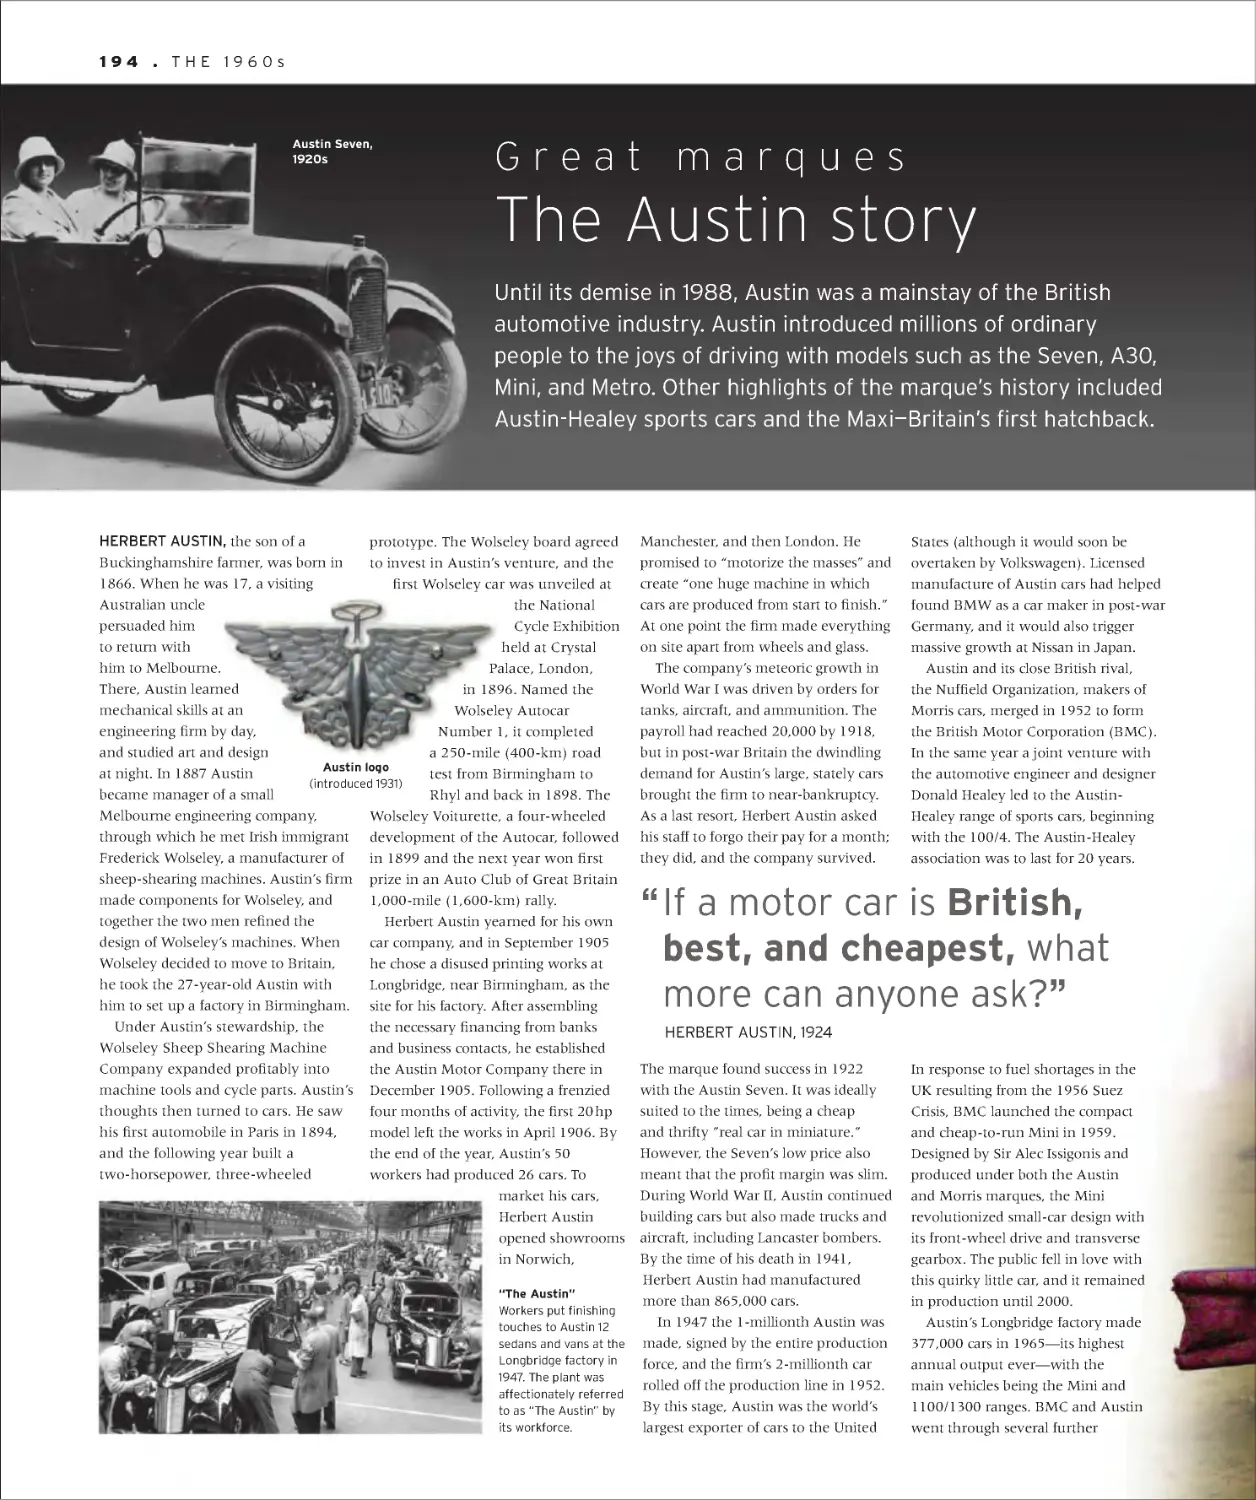 Great marques: The Austin story 194